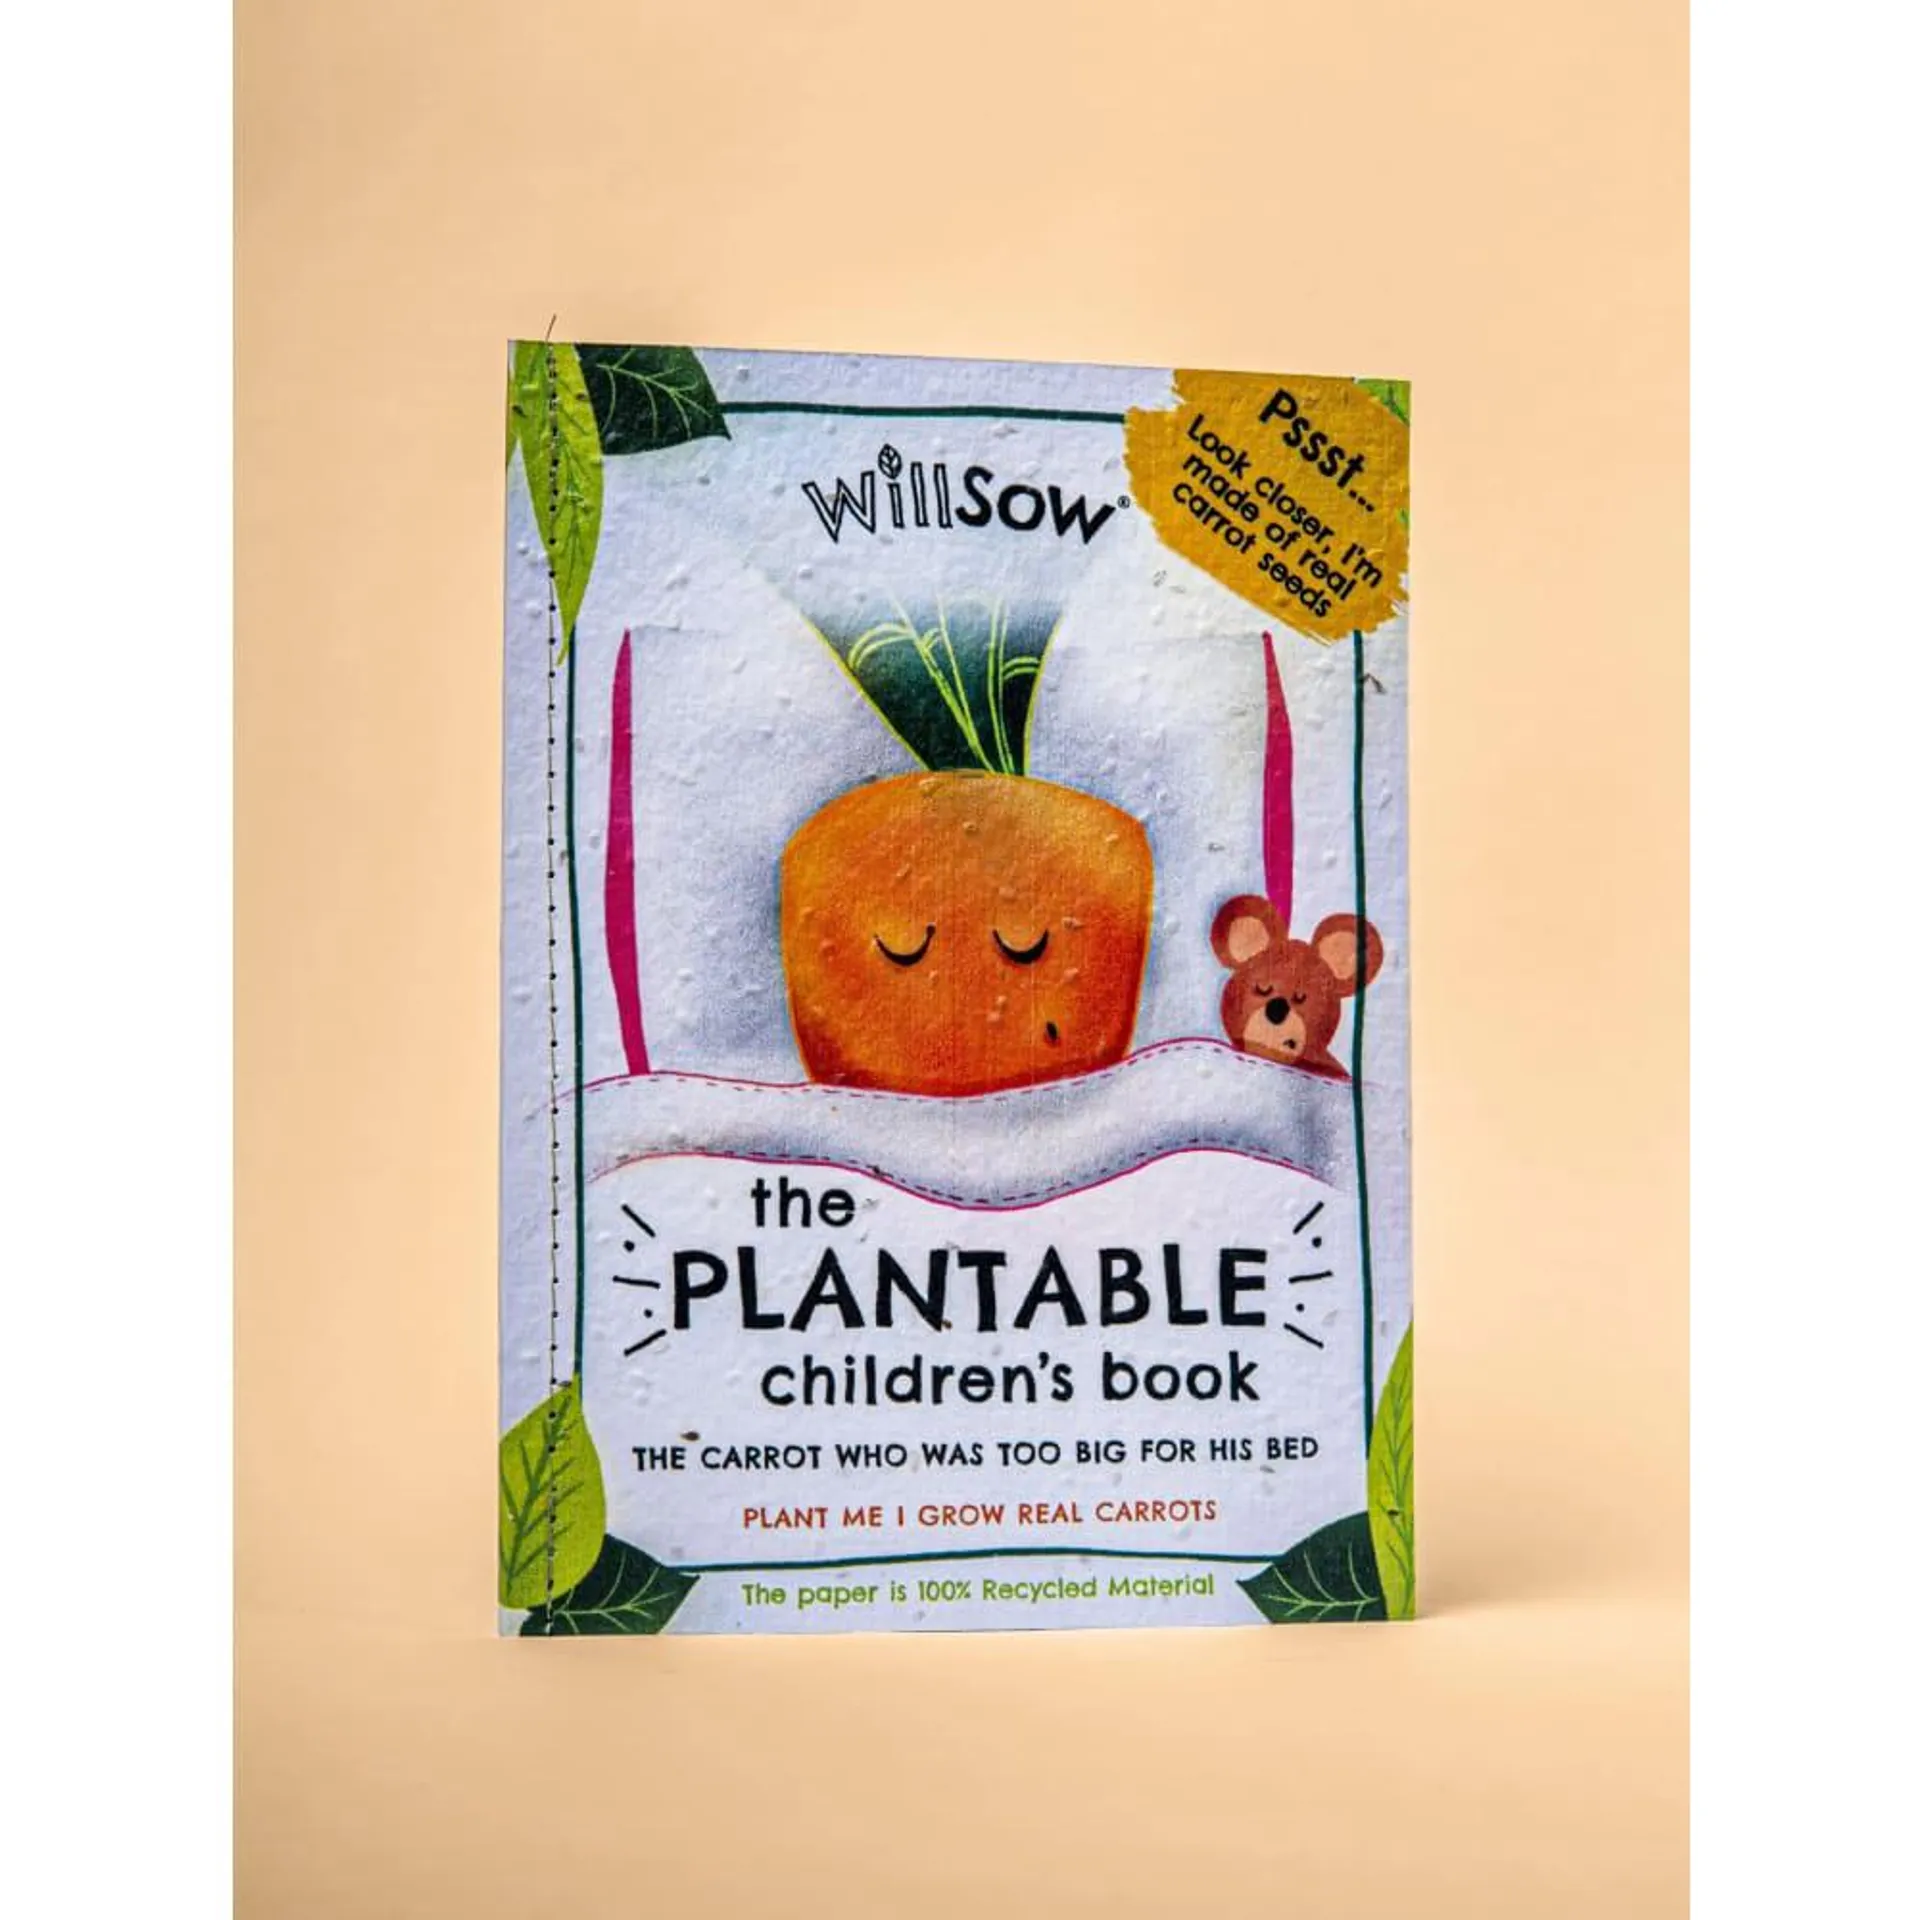 Plantable Children's Book- The Carrot Who Was Too Big For His Bed